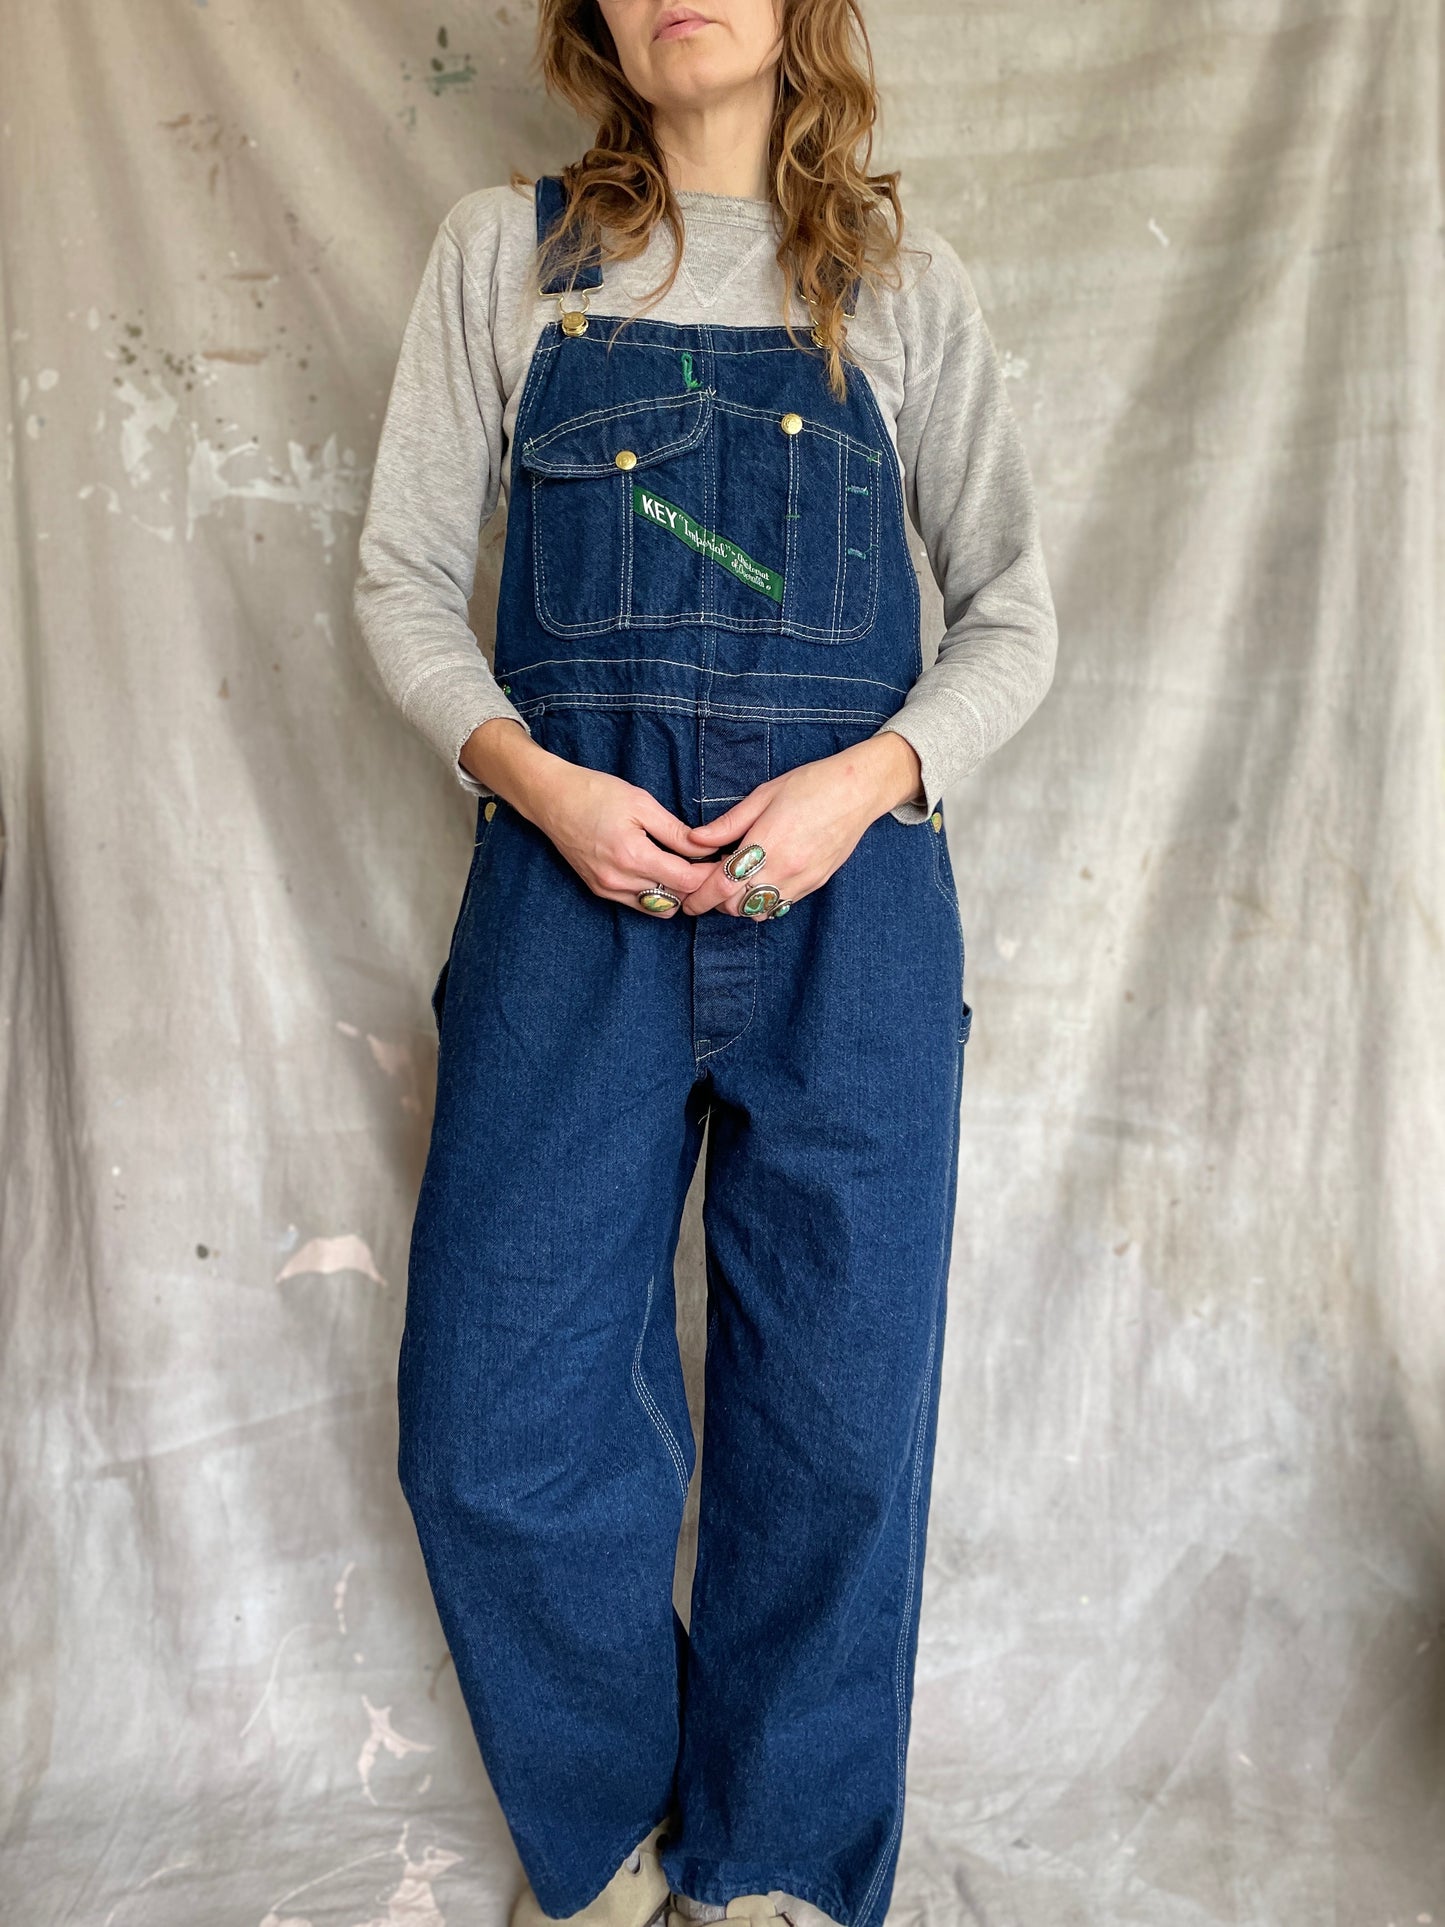 90s Key Imperial Dark Wash Overalls